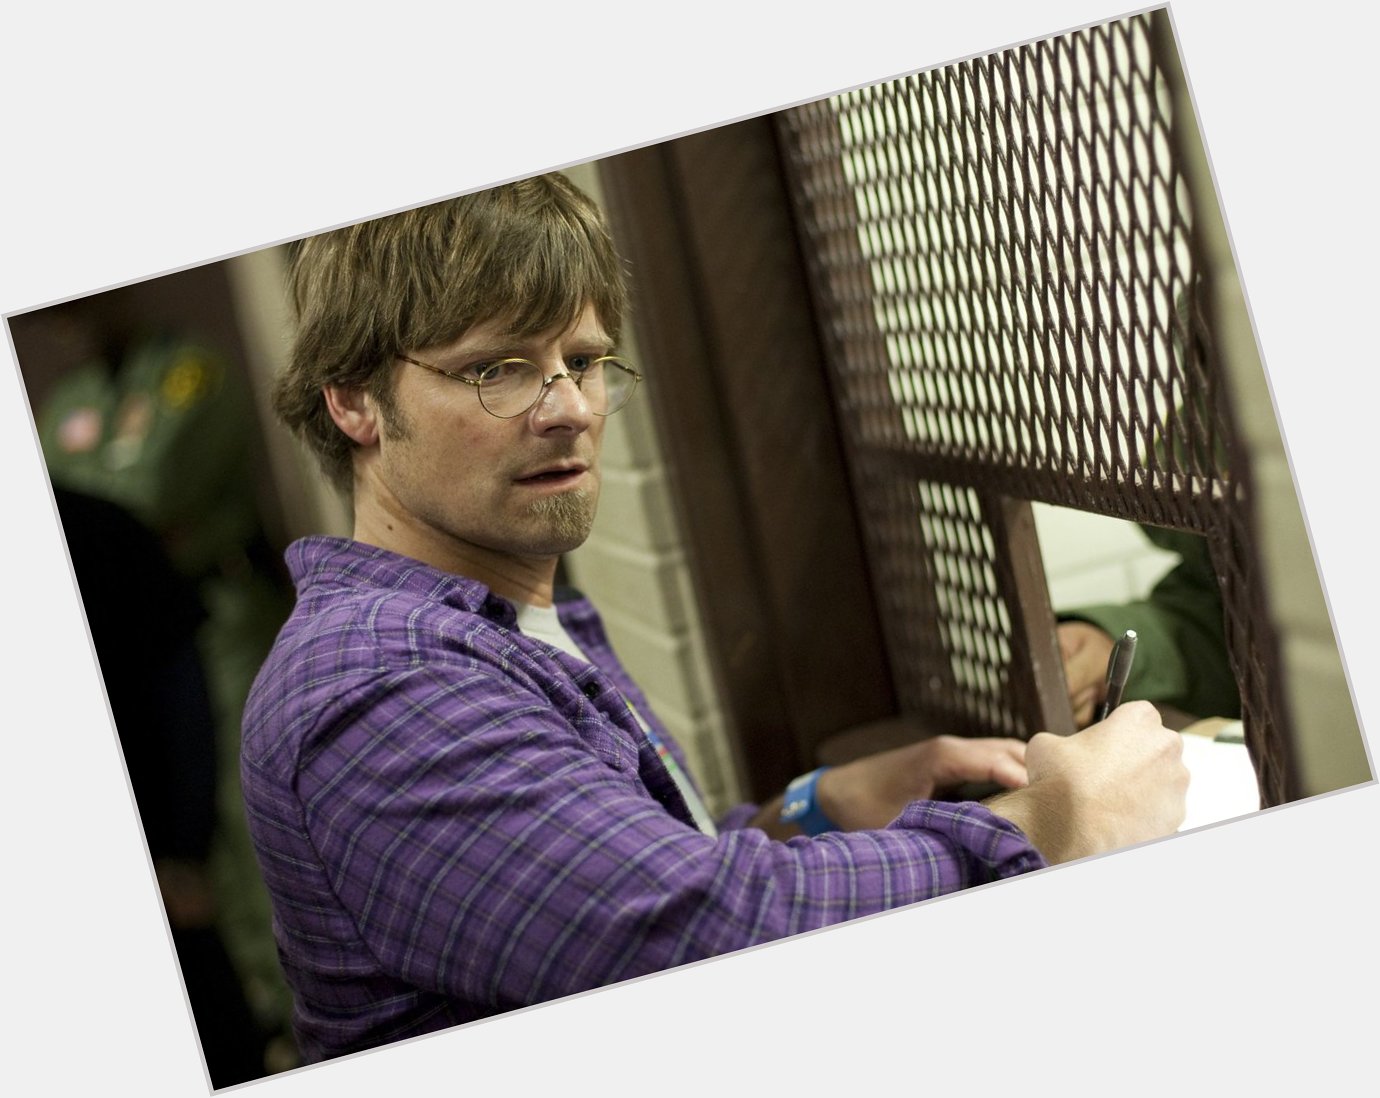 Friday the 13th is lucky for some - join us in wishing Steve Zahn a very Happy Birthday. 